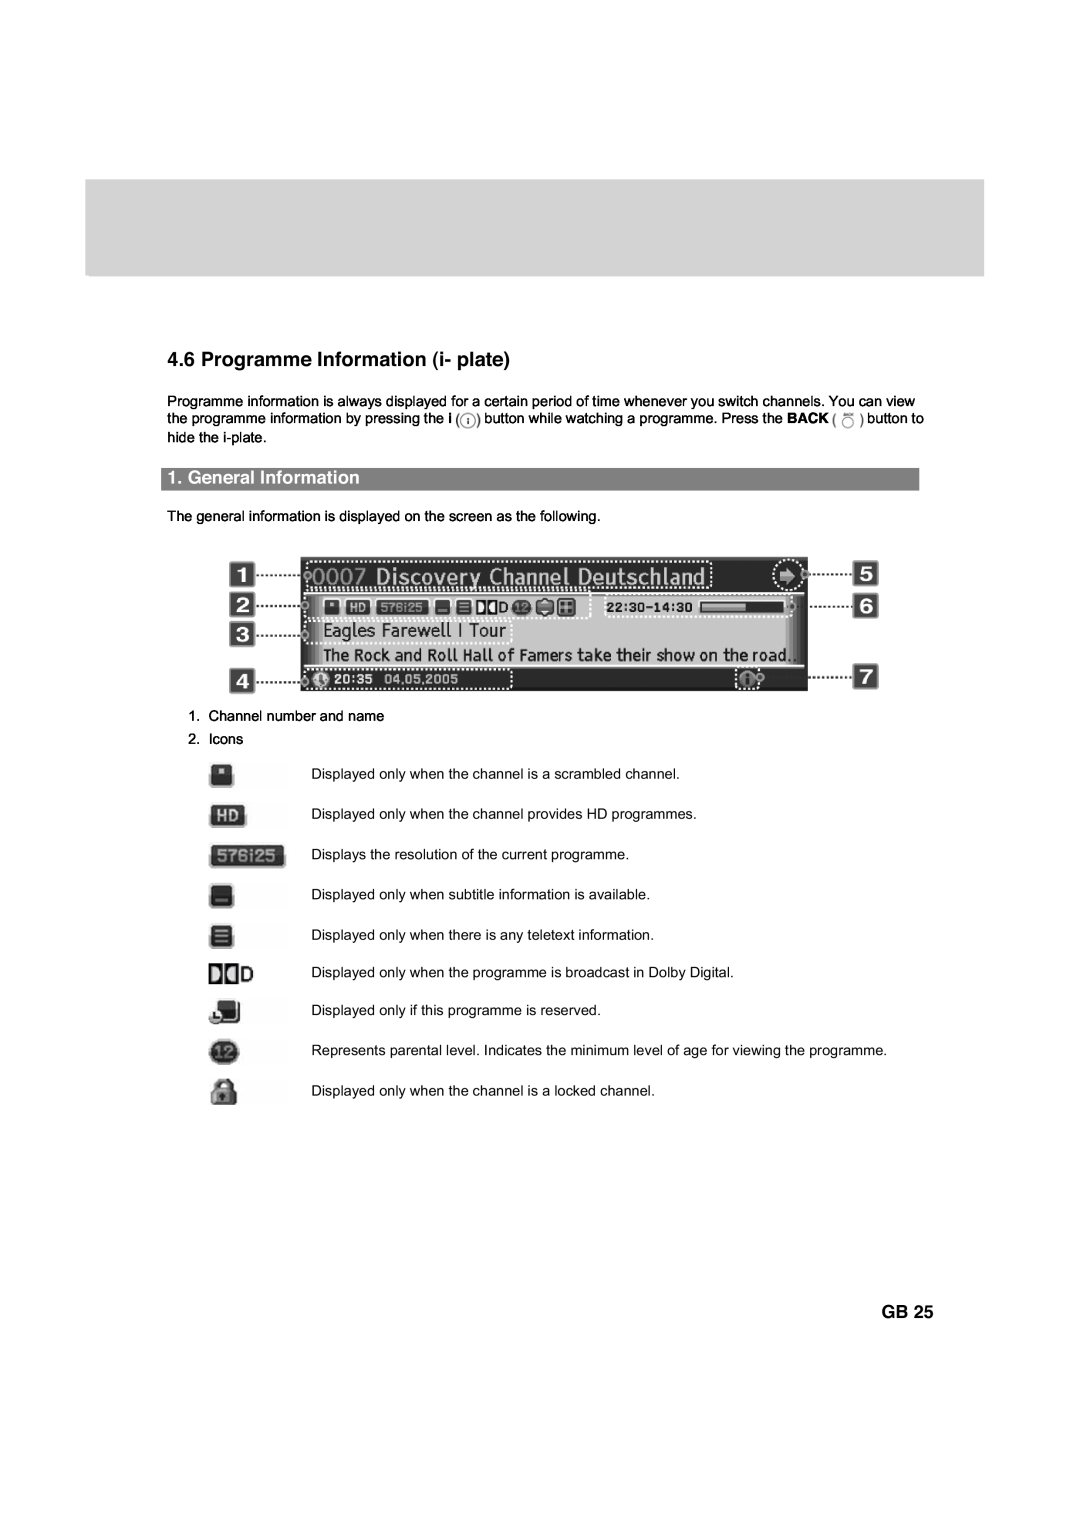 Humax HDCI-2000 manual Programme Information i- plate, General Information 